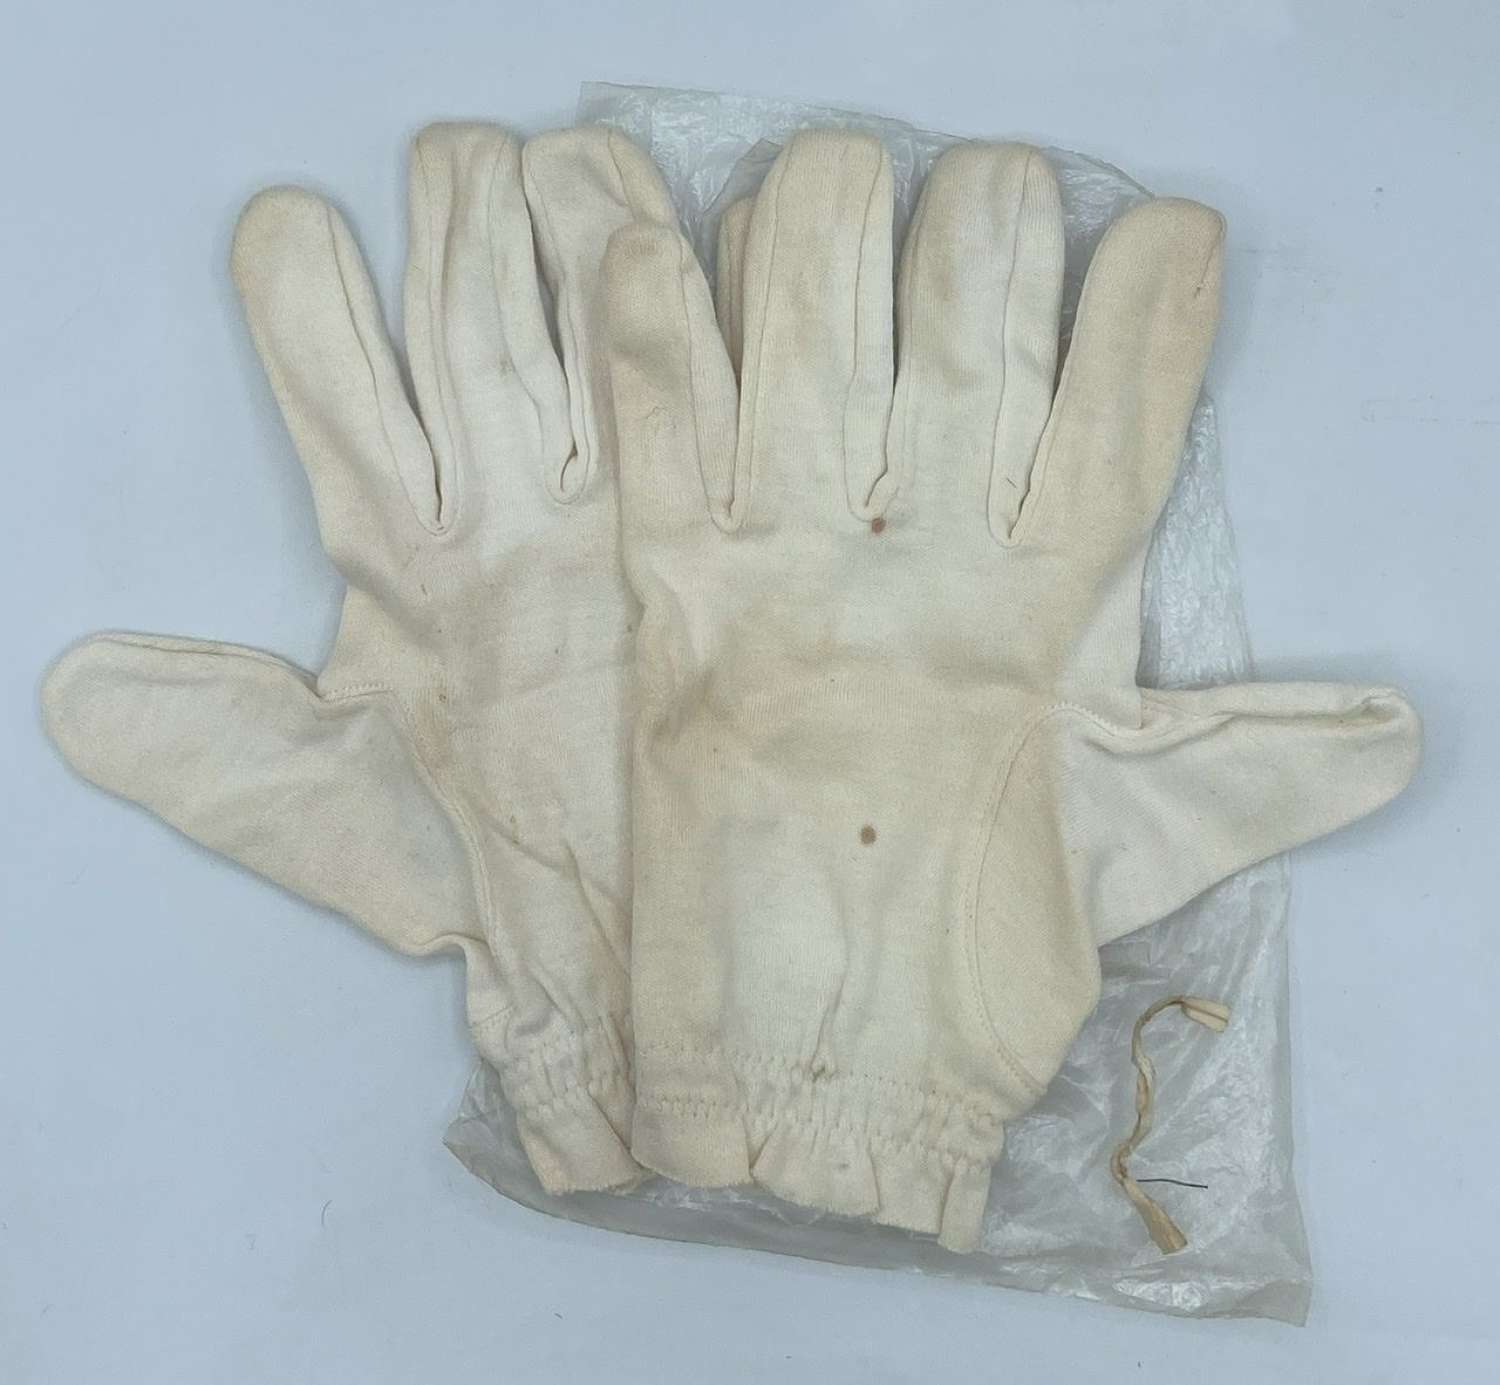 WW2 British Army Medical Cotton Gloves Elasticated Wrists Unissued